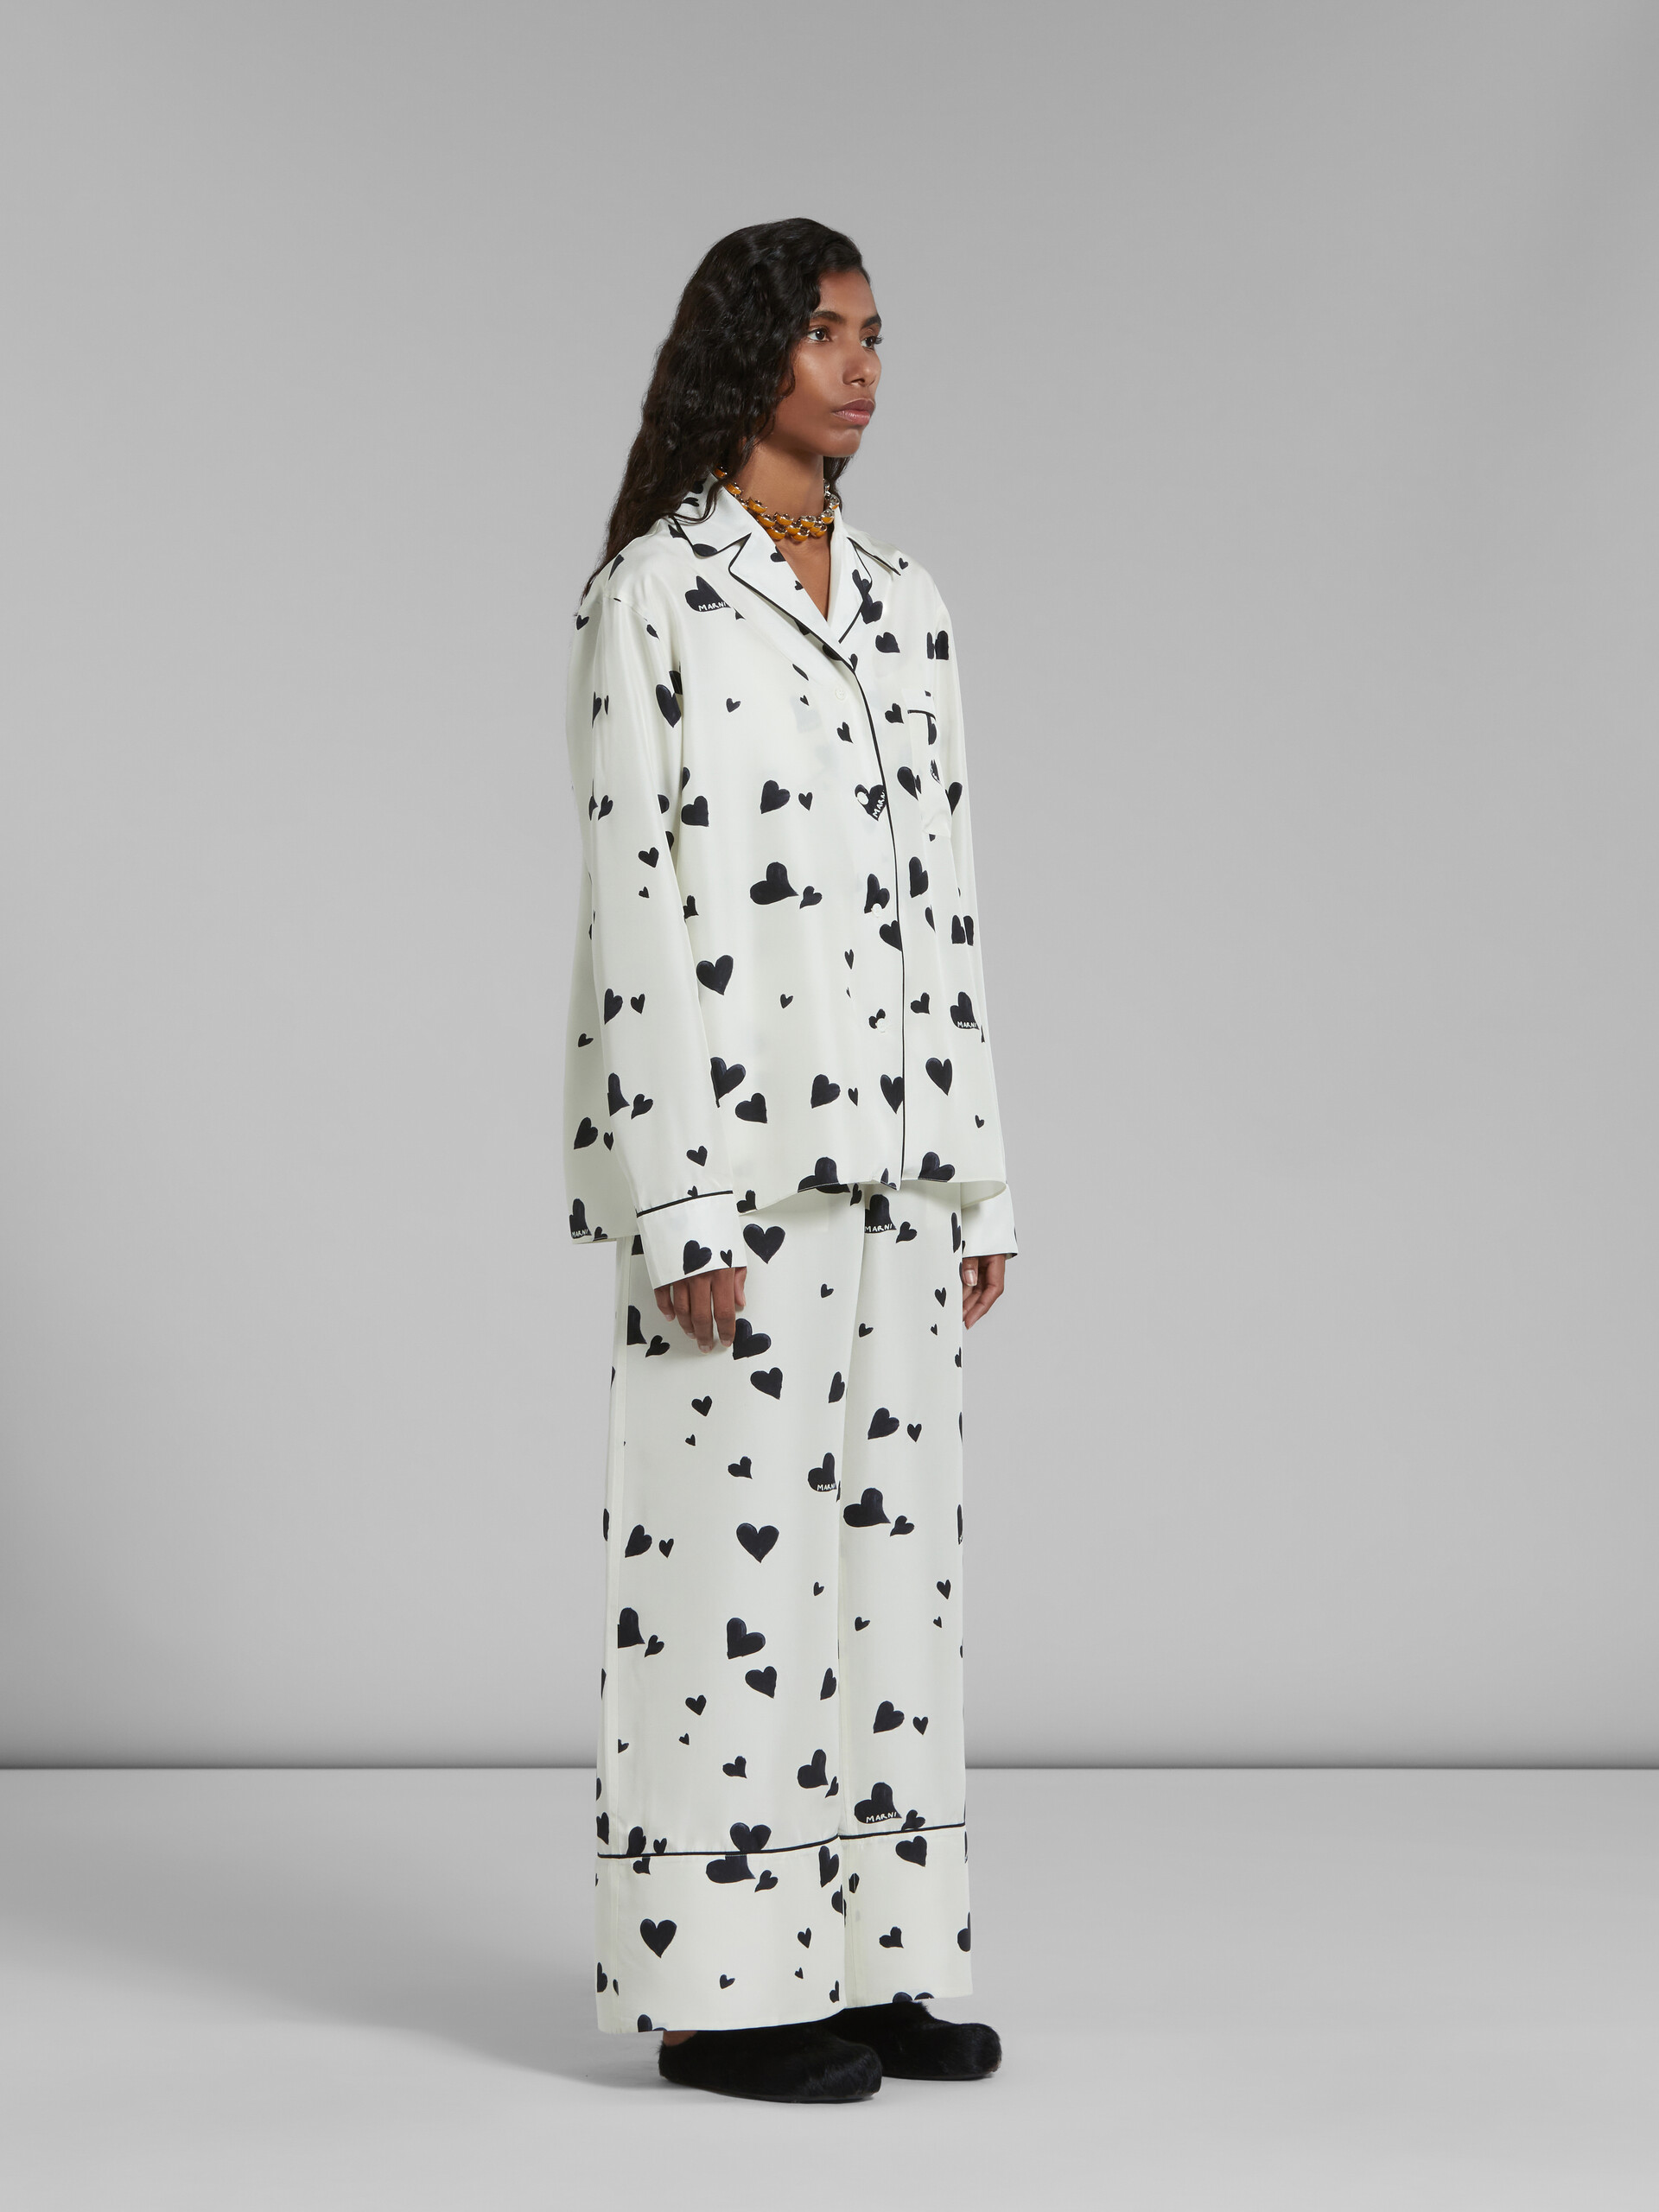 White silk pyjama trousers with Bunch of Hearts print - Pants - Image 5